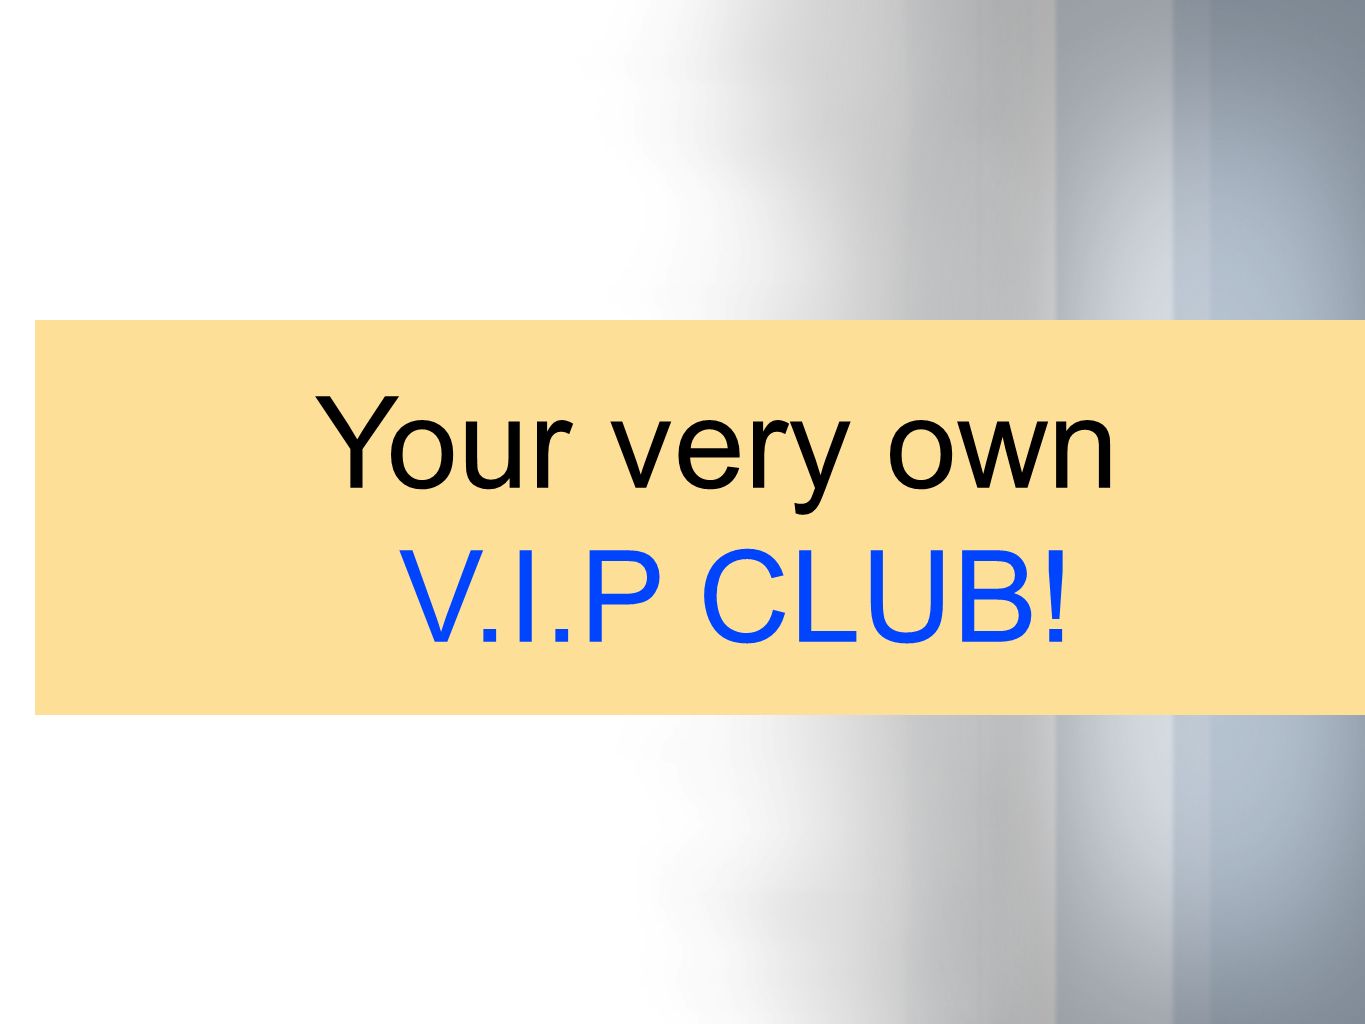 Your very own V.I.P CLUB!